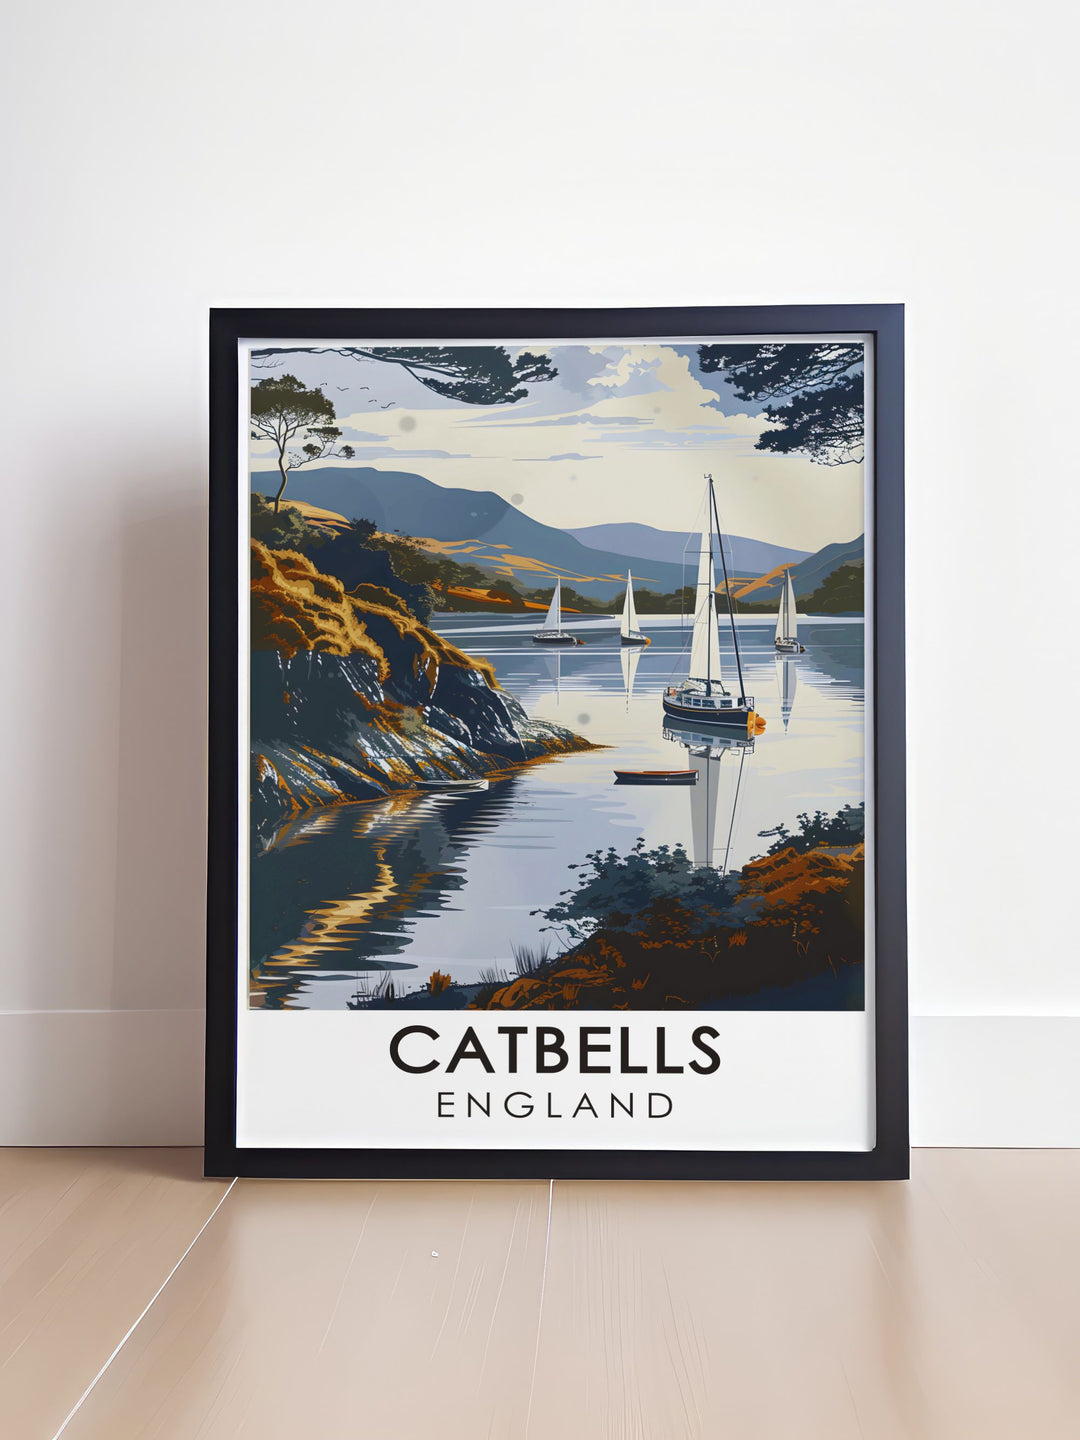 Lake District poster featuring the breathtaking Catbells Summit and Derwentwater Shoreline providing a picturesque view that captures the serene beauty of Cumbria ideal for wall decor in your living room bedroom or office